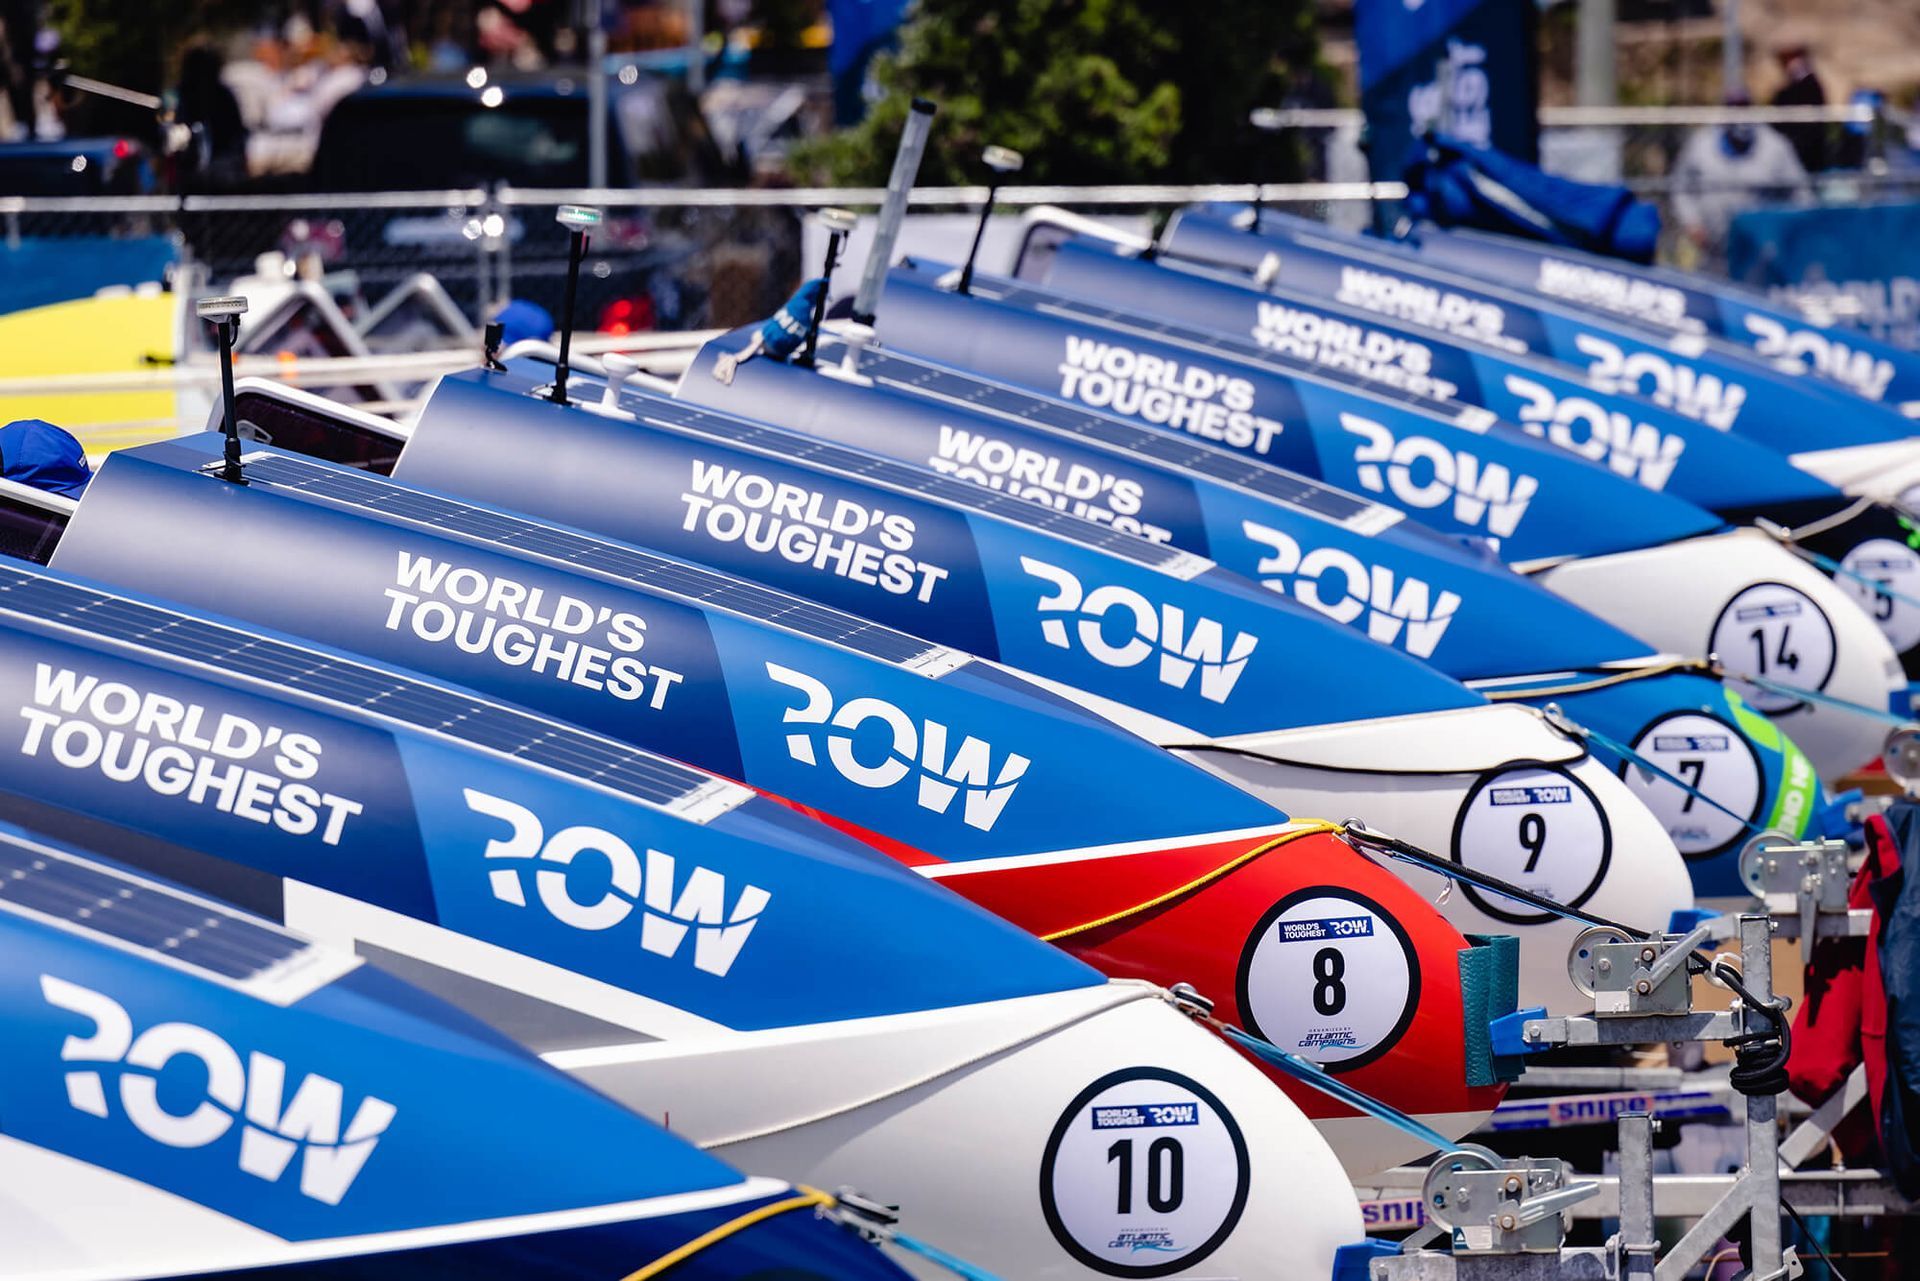 Ocean rowing boats in a line ready for Worlds Toughest Row